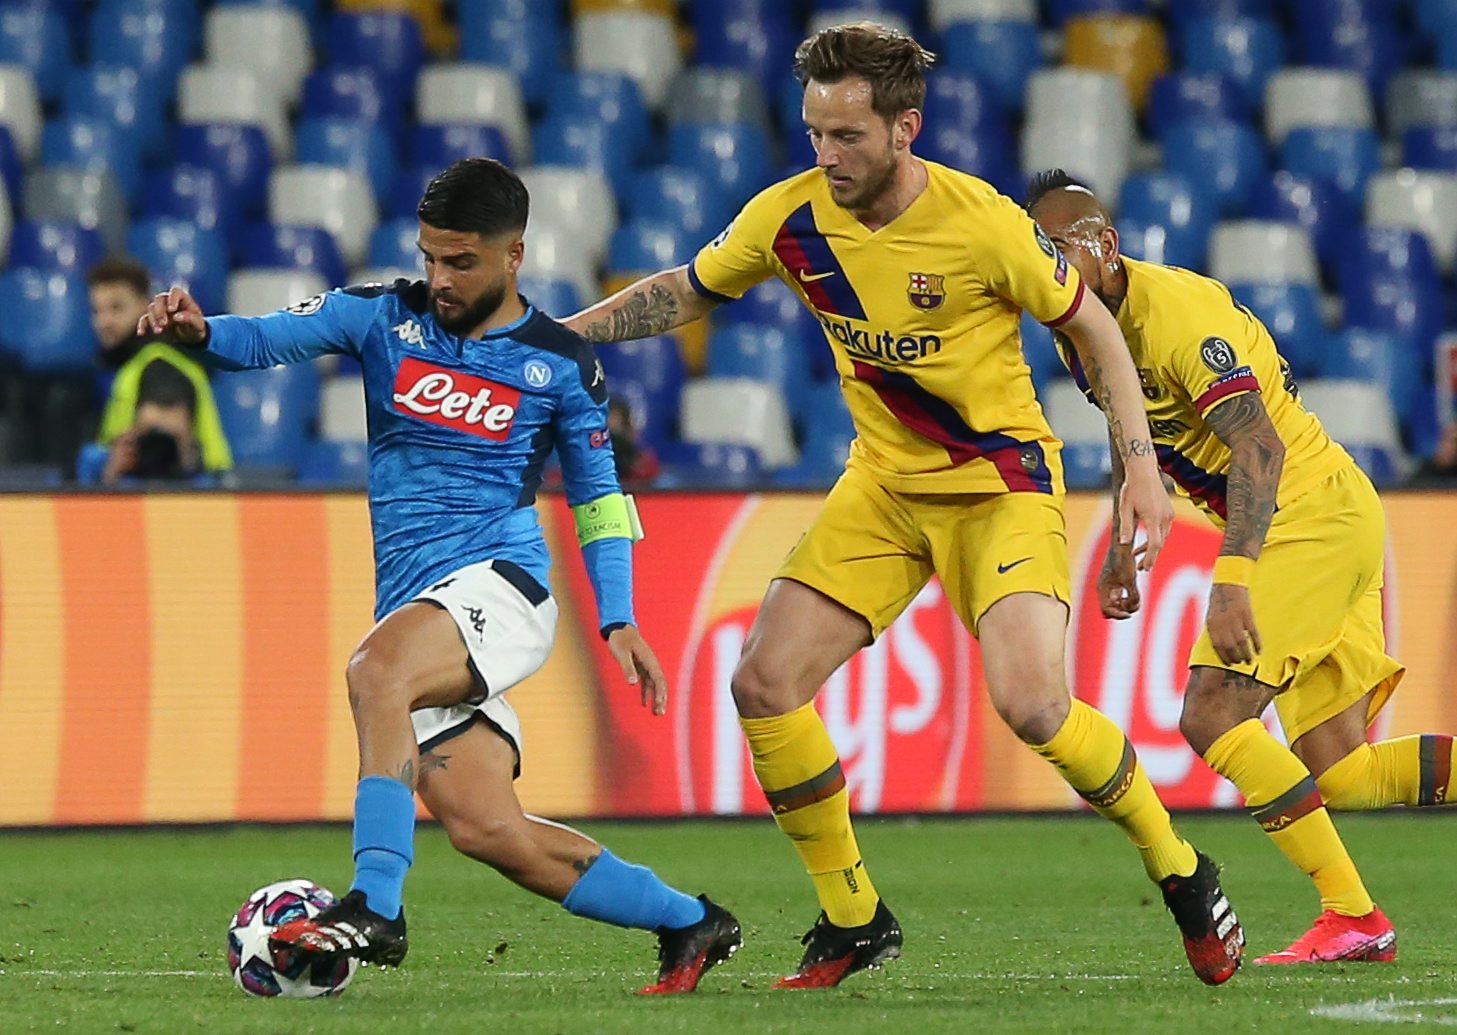 Napoli's Italian forward Lorenzo Insigne (L) vies for the ball with Barcelona's Croatian midfielder Ivan Rakitic (C) and Barcelona's Chilean midfielder Arturo Vidal (R) during the UEFA Champions League round of 16 first-leg football match between SSC Napoli and FC Barcelona at the San Paolo Stadium in Naples on February 25, 2020. (Photo by CARLO HERMANN / AFP)